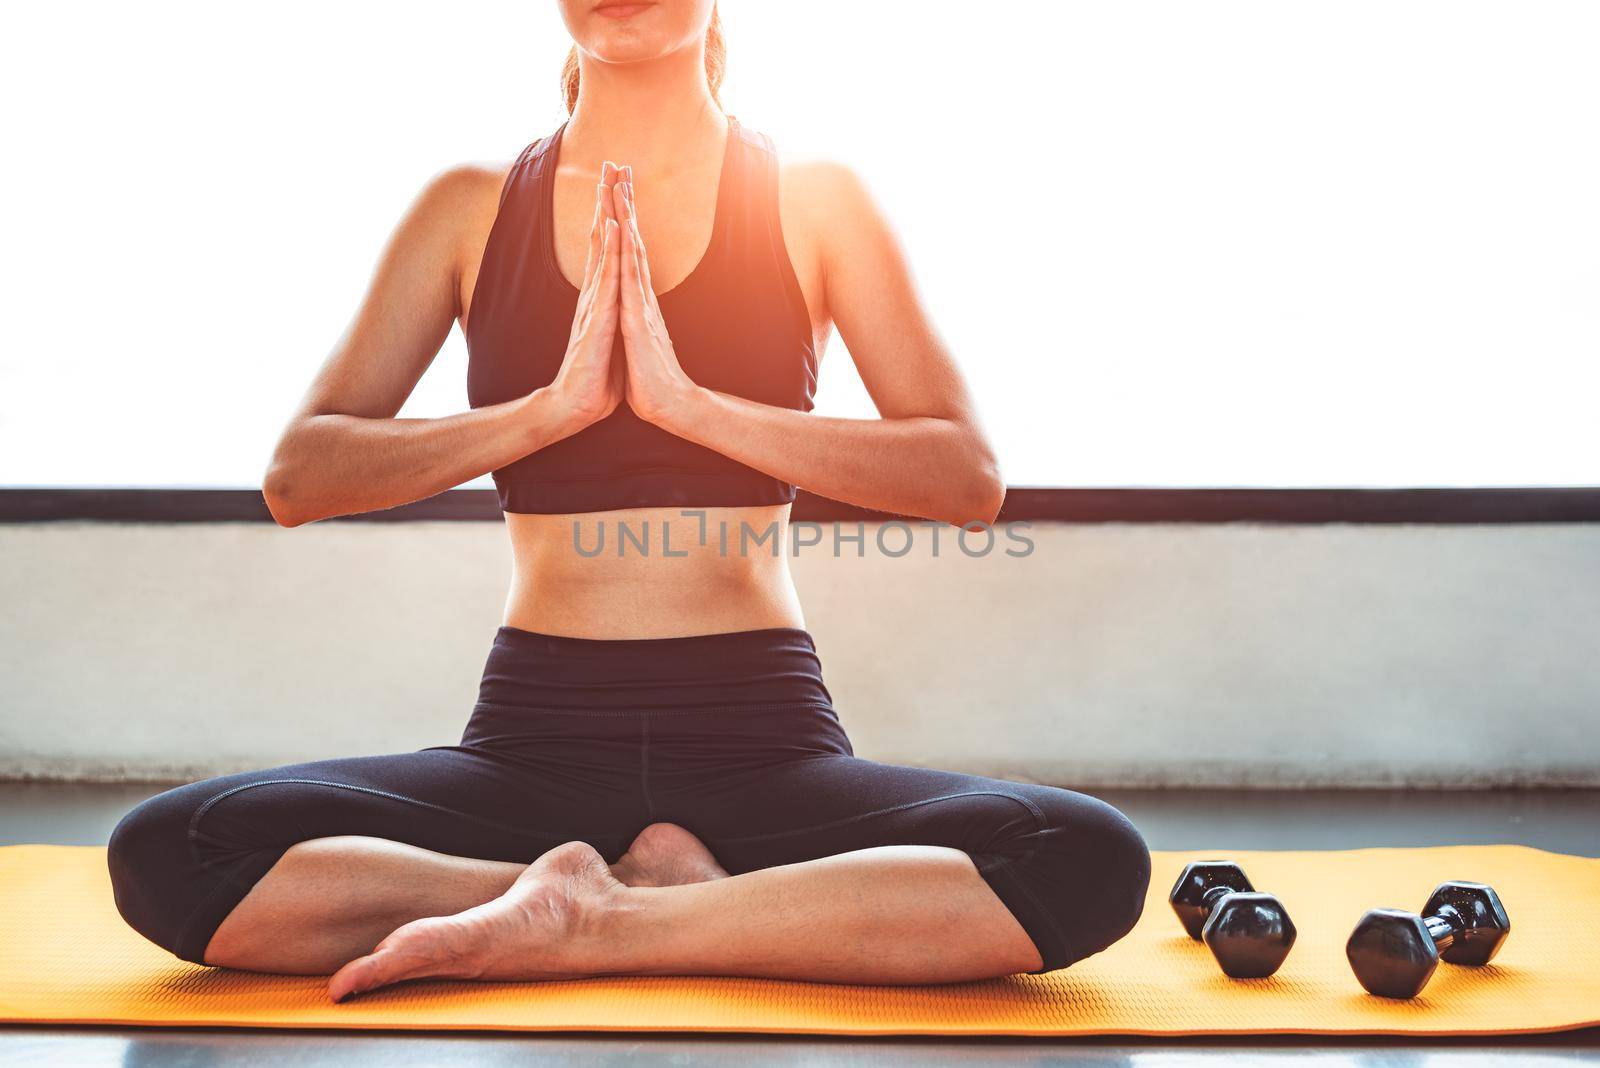 Front view beauty woman doing yoga and raise hand or pay obeisance in fitness workouts training gym center.  Lifestyle sport woman sitting on mat with sport equipment and exercise dumbbells background by MiniStocker